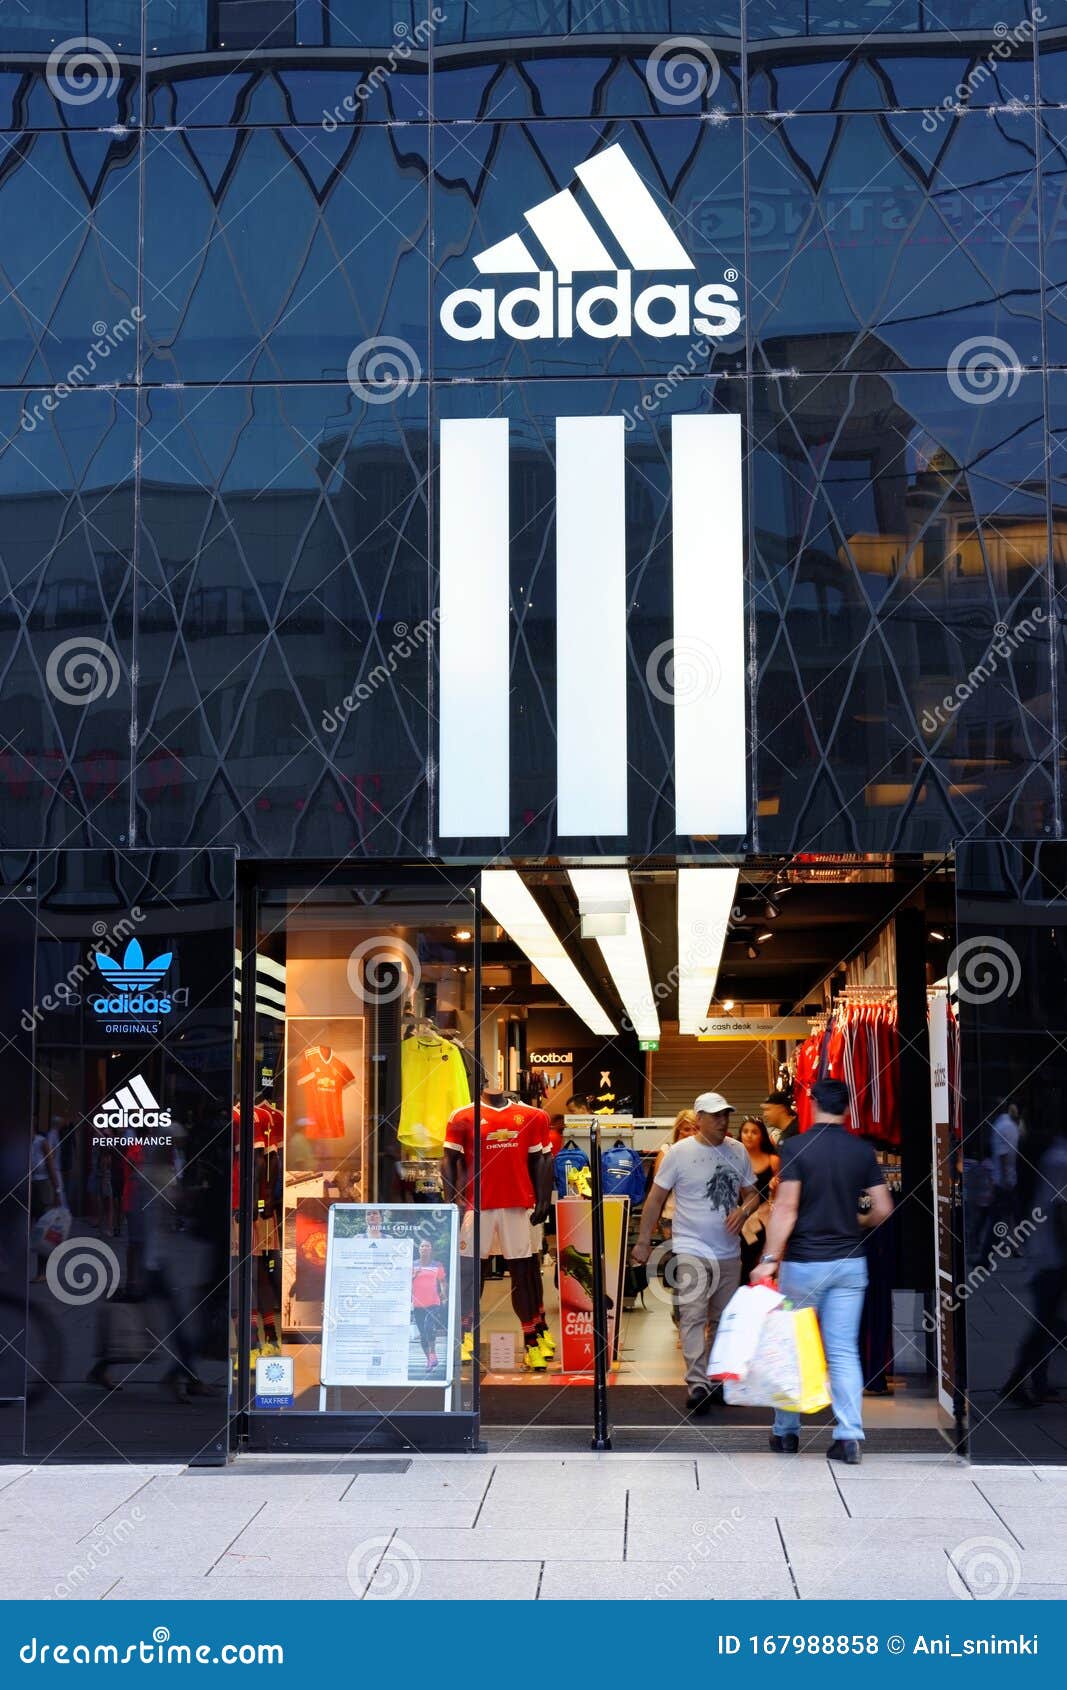 adidas commercial germany